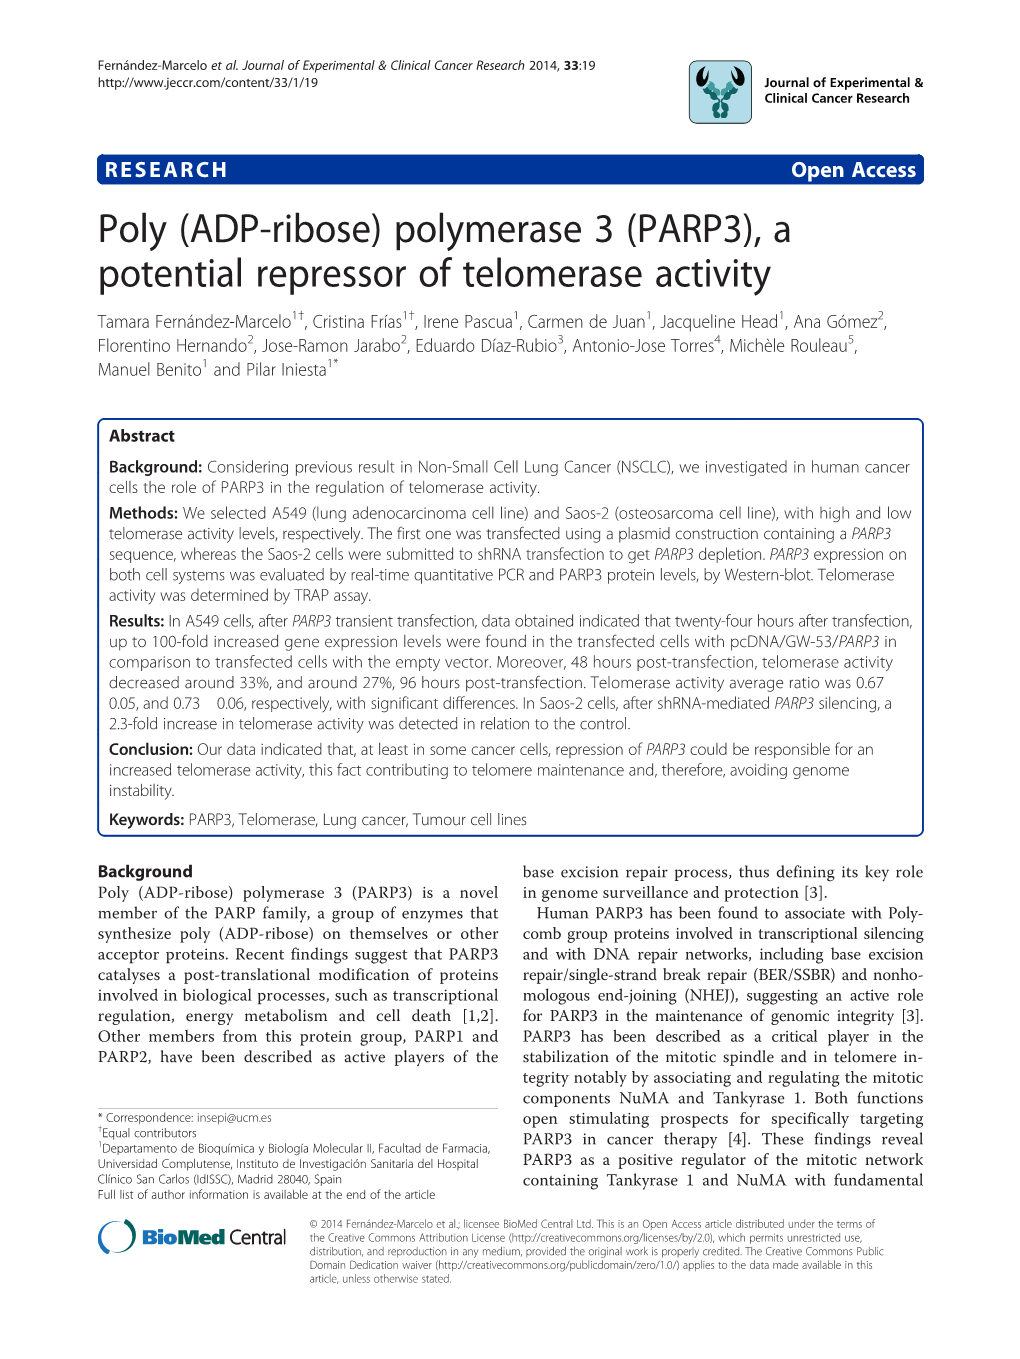 Poly (ADP-Ribose) Polymerase 3 (PARP3), a Potential Repressor Of